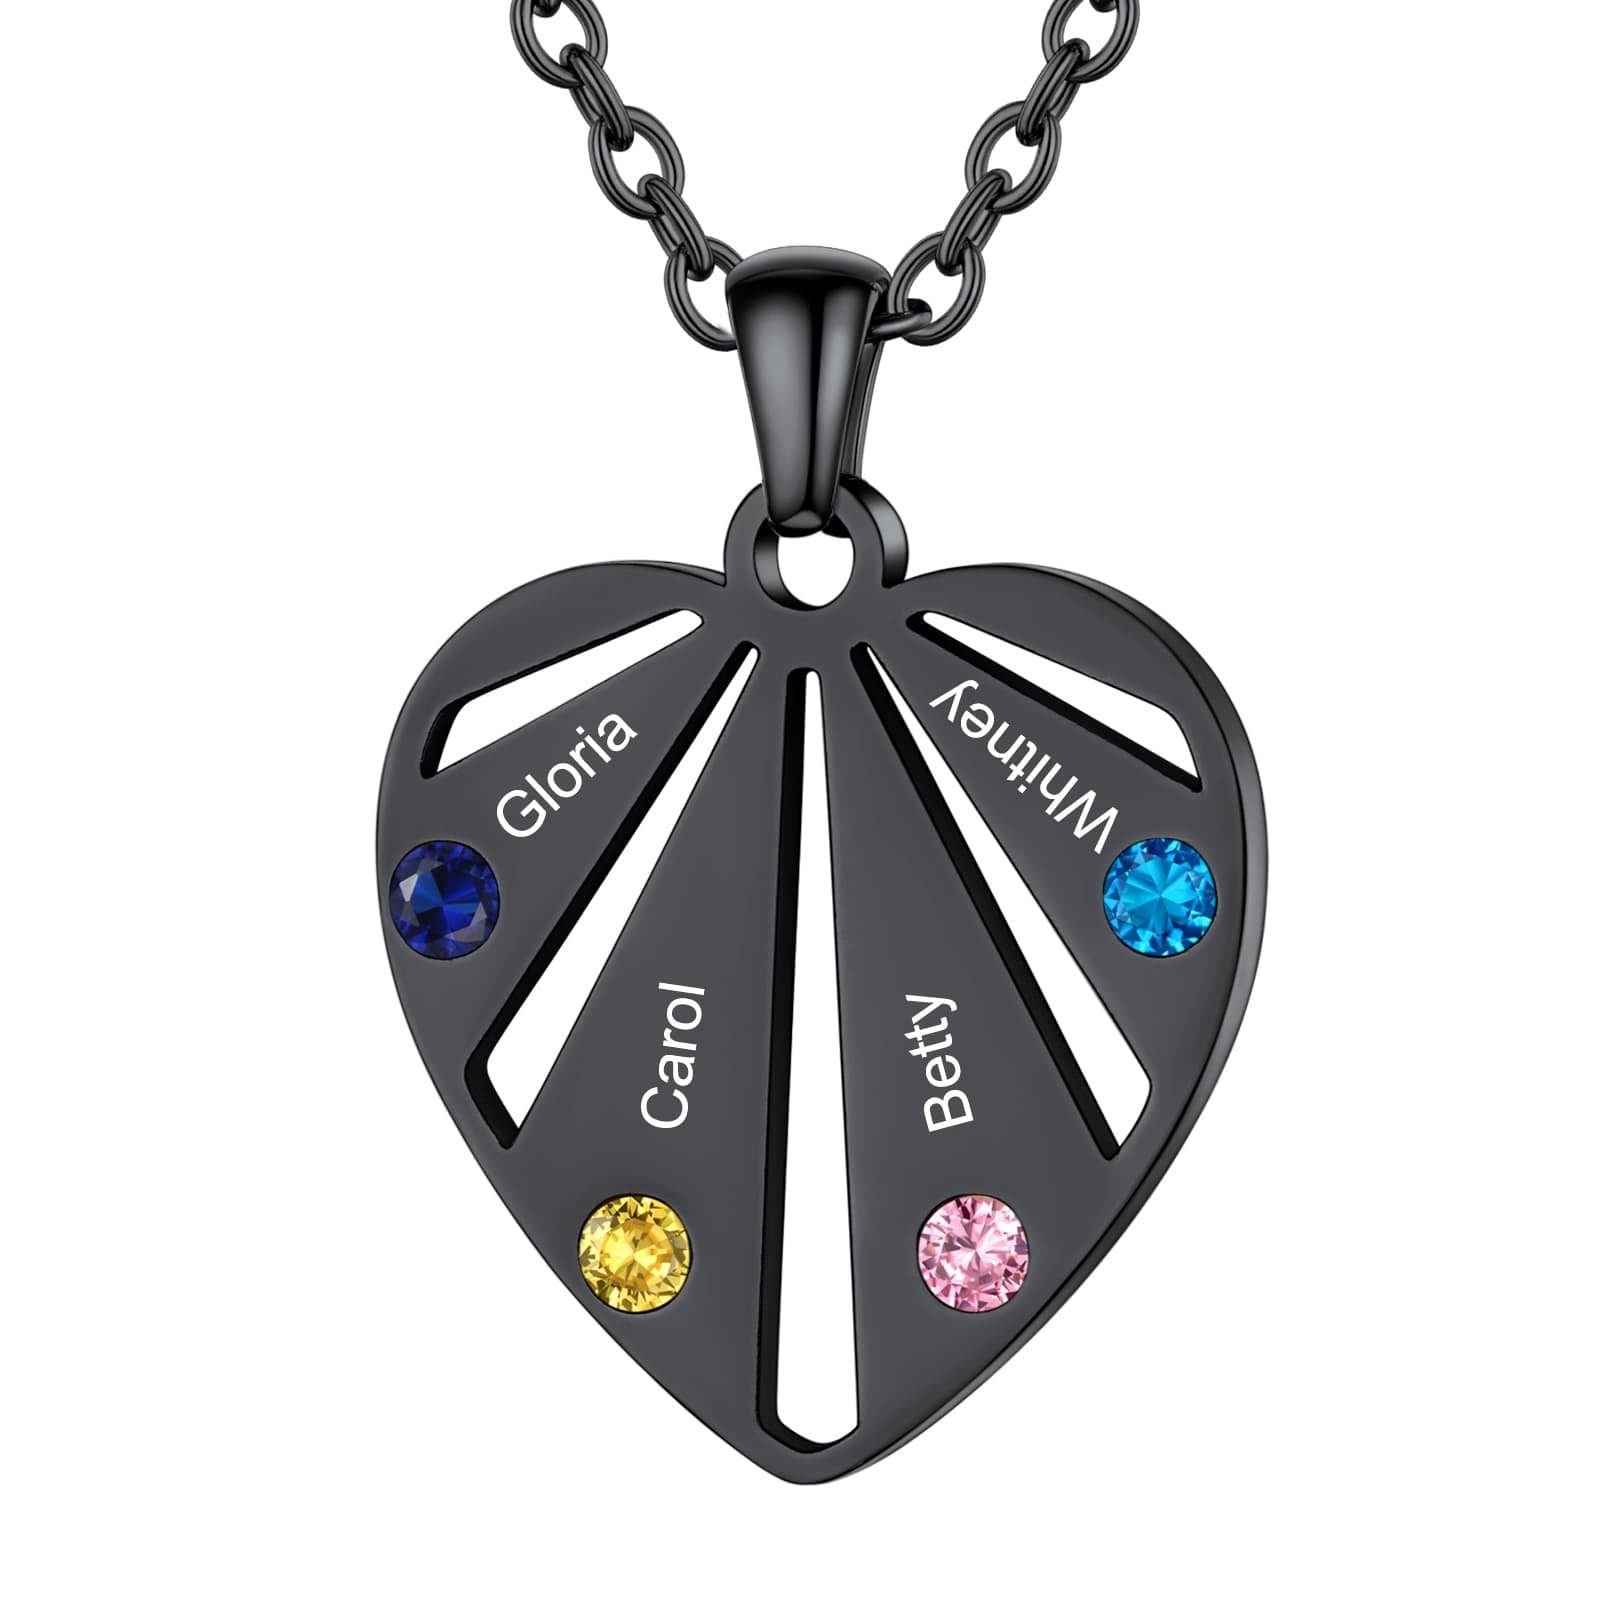 Personalized Engraved Heart Birthstone Necklace 4 stones black